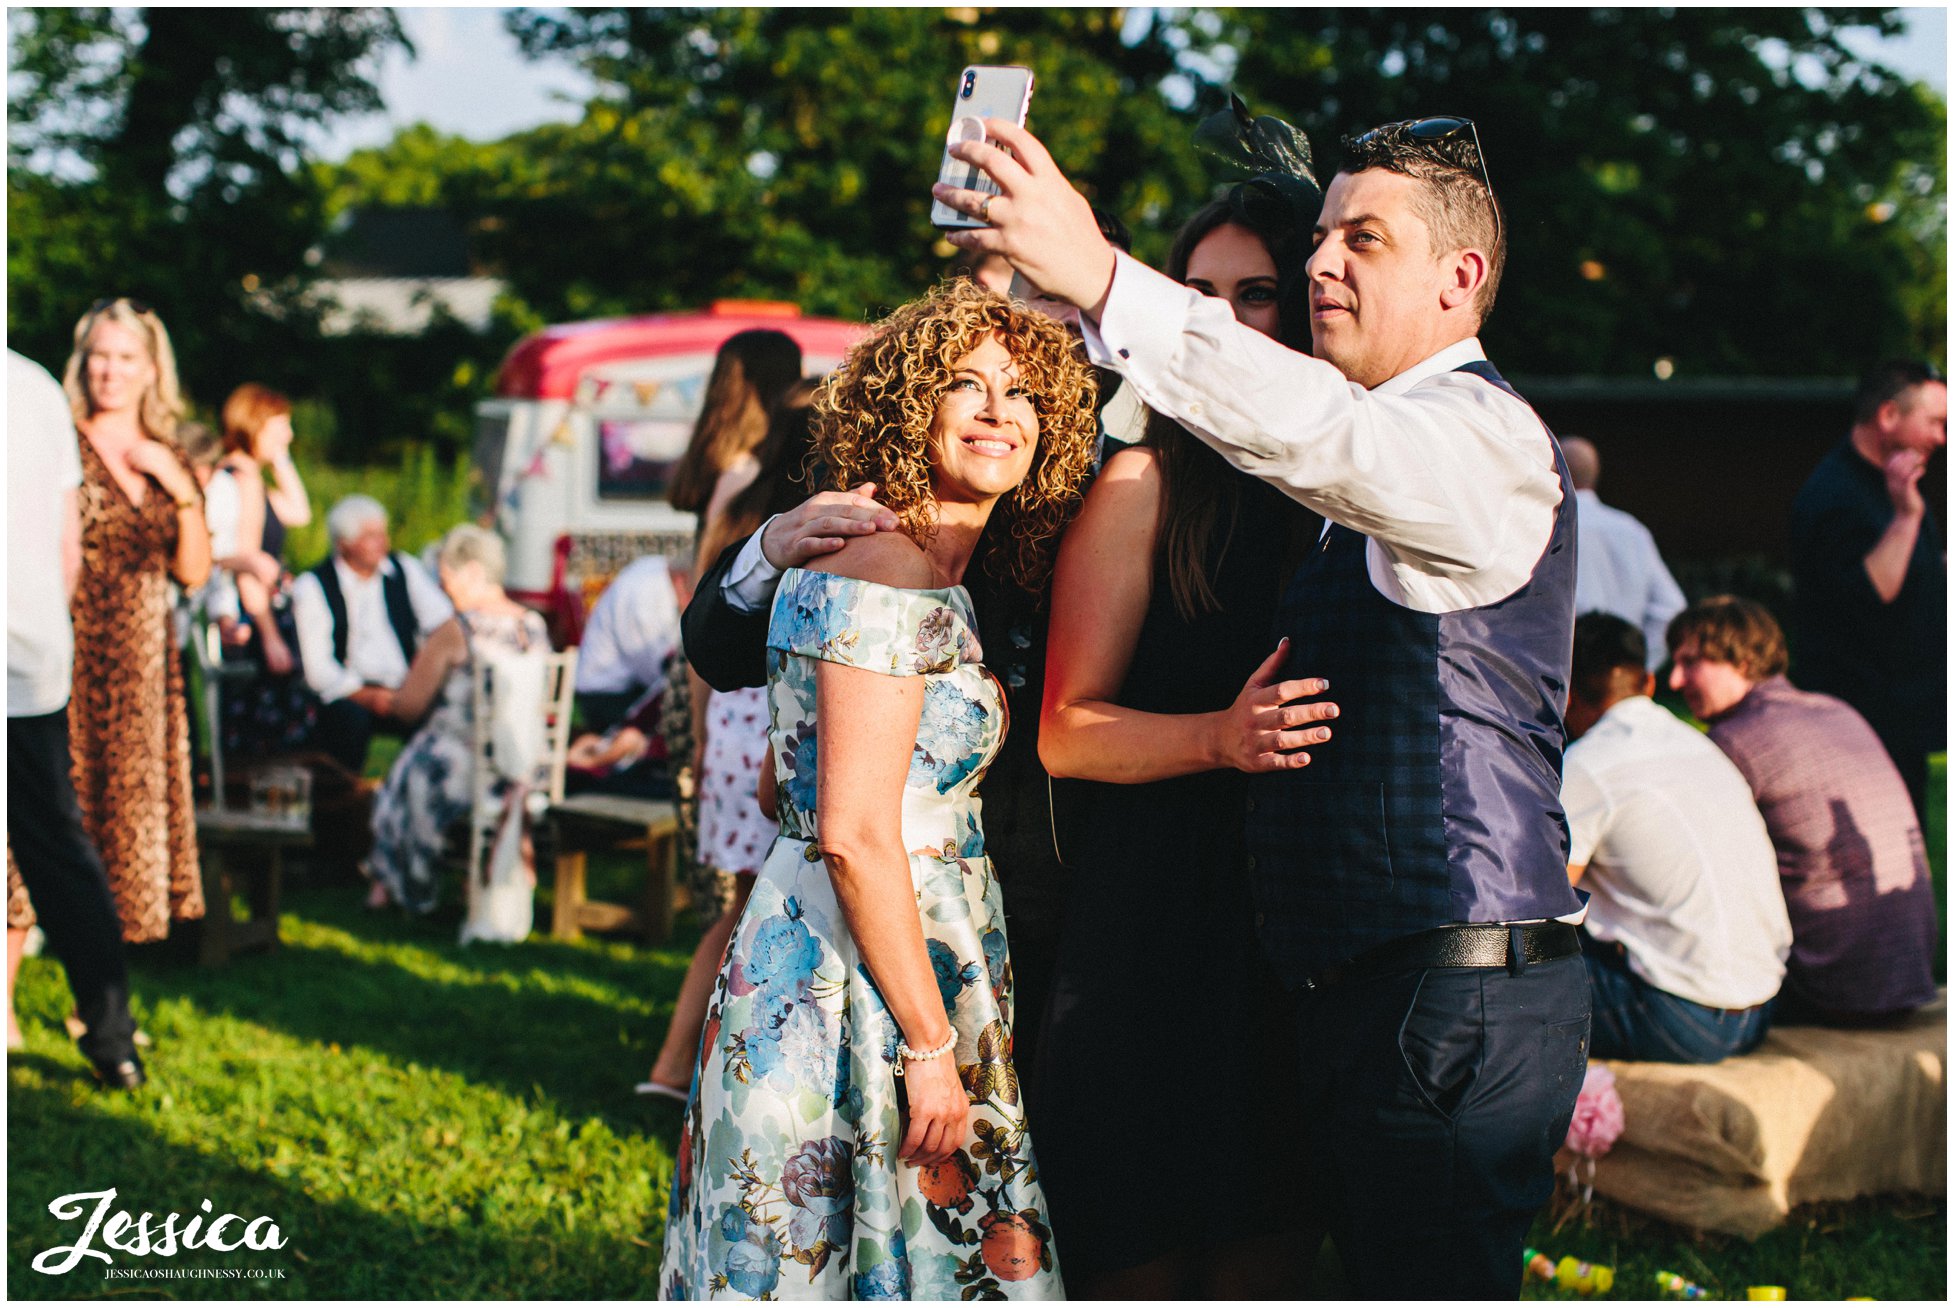 wedding guests take selfie in the evening sun